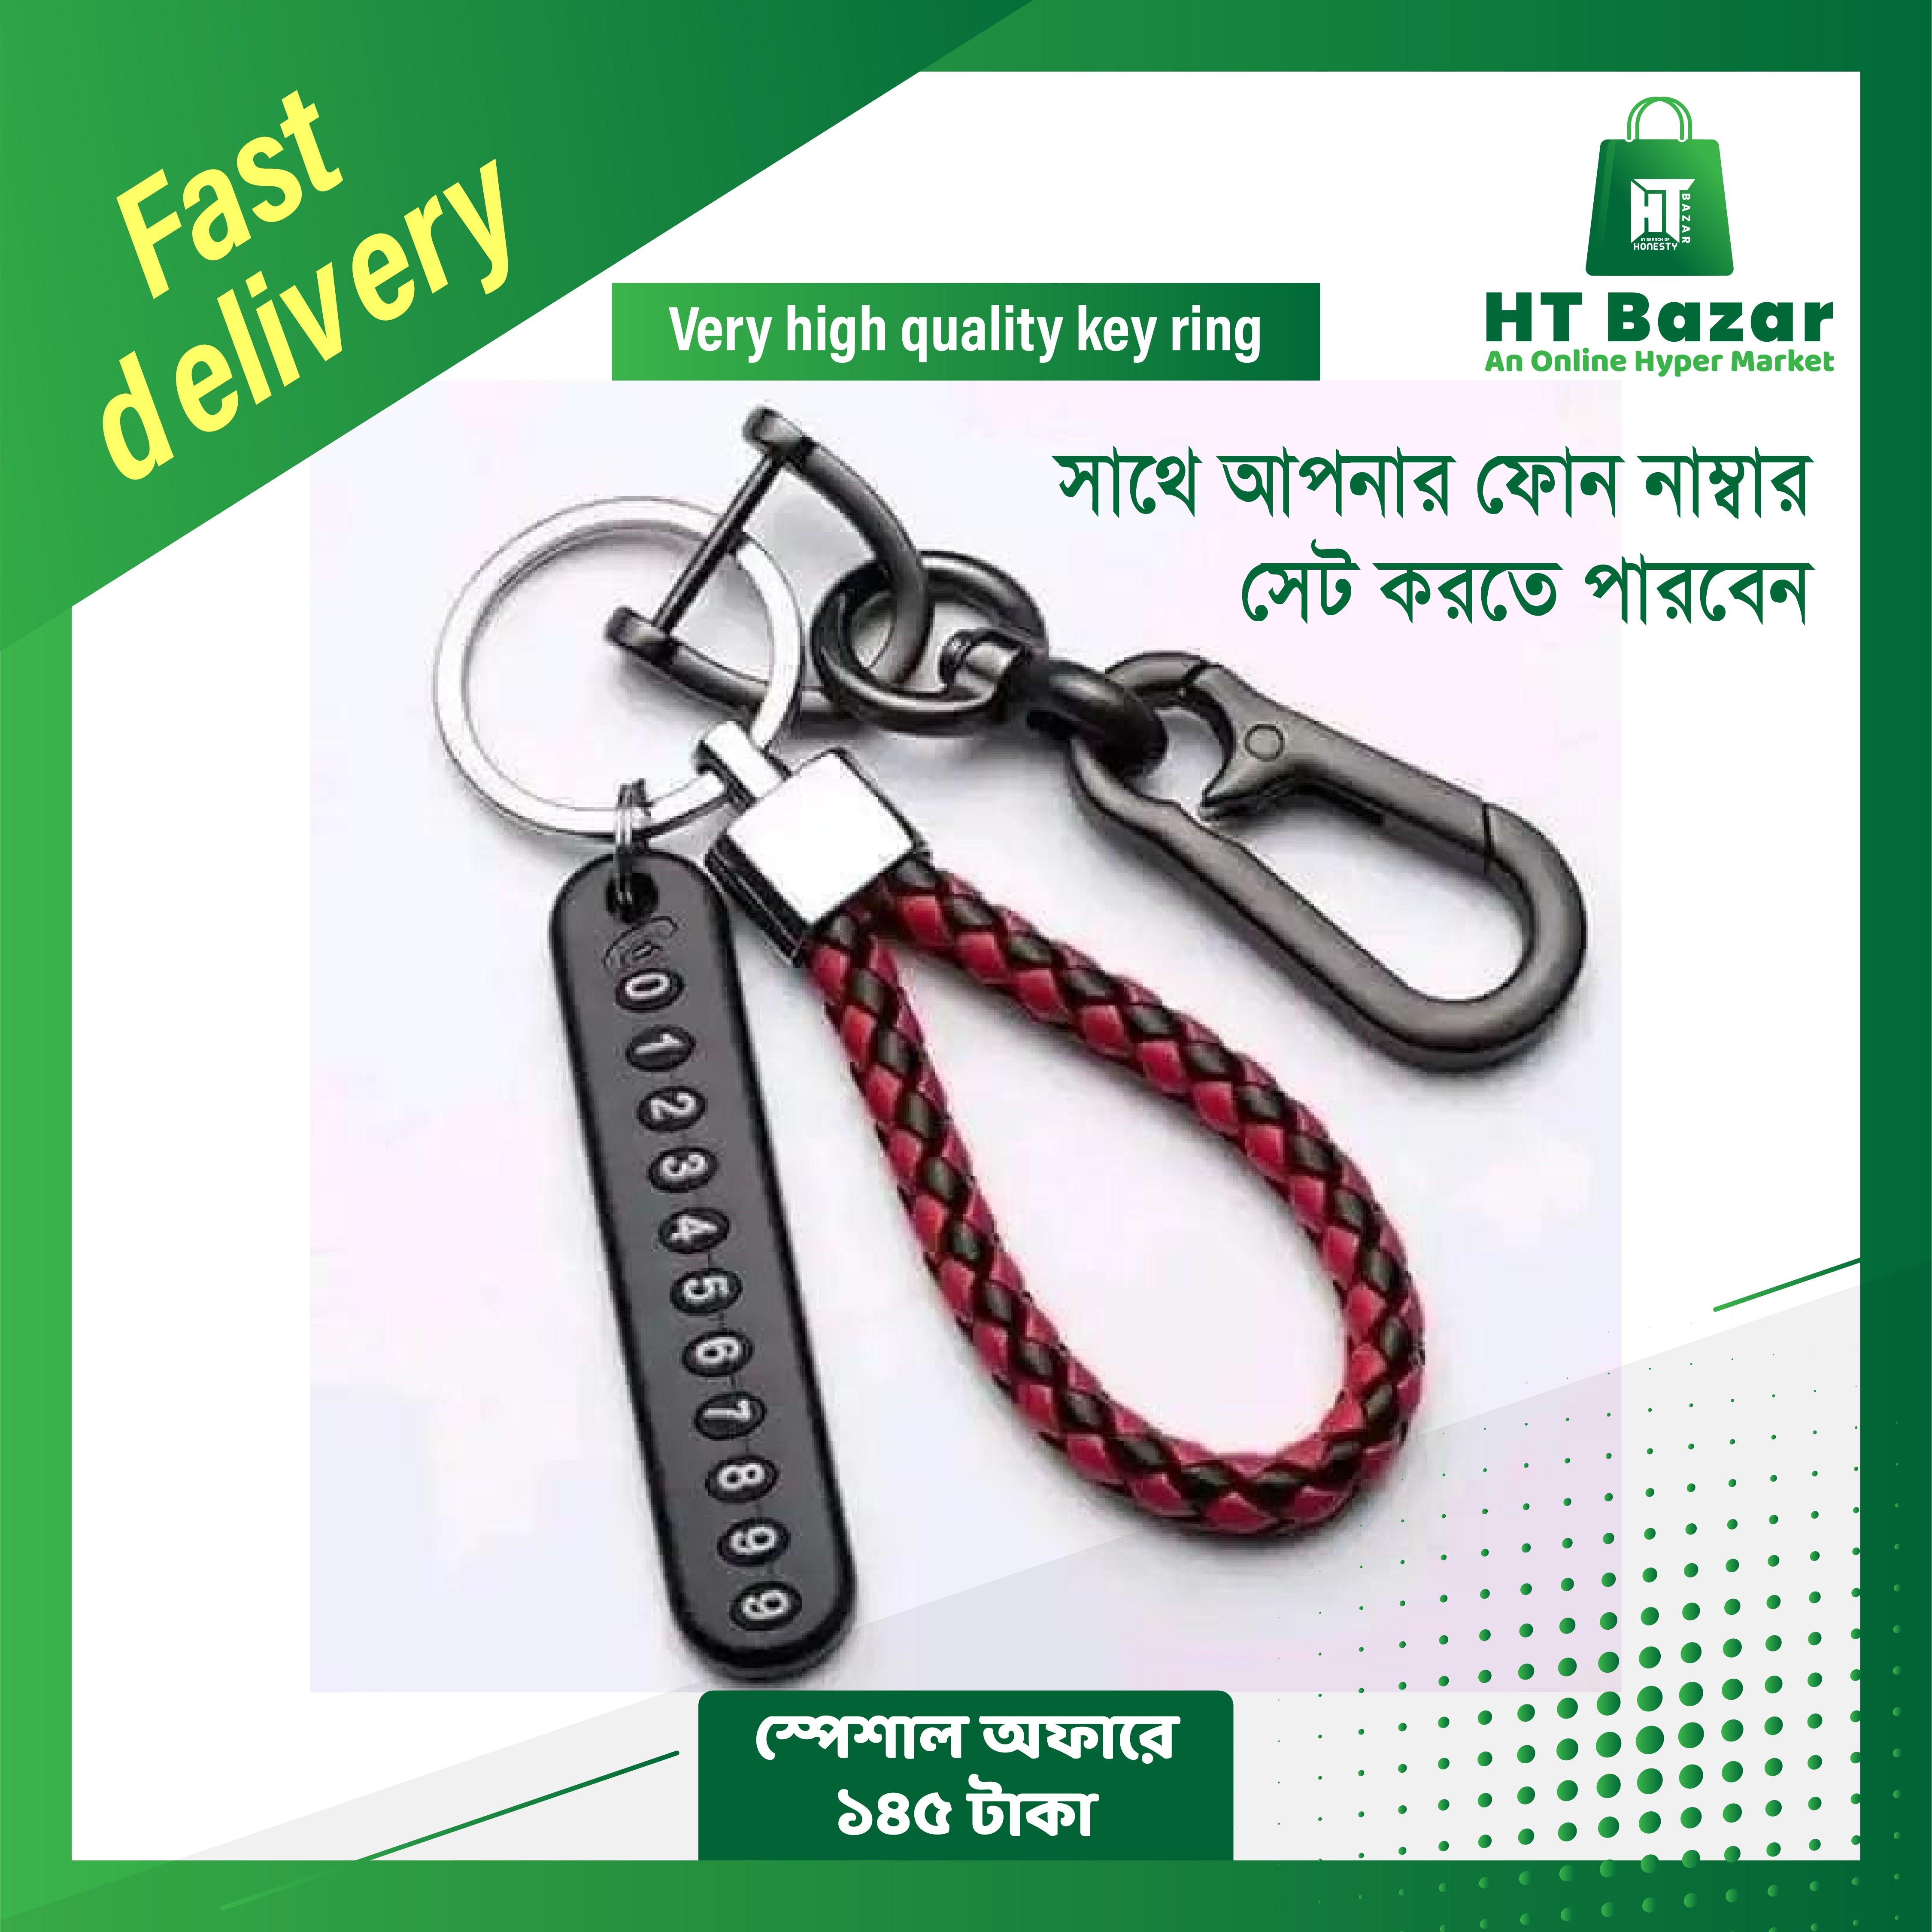 Key Ring with Phone Number - HT Bazar